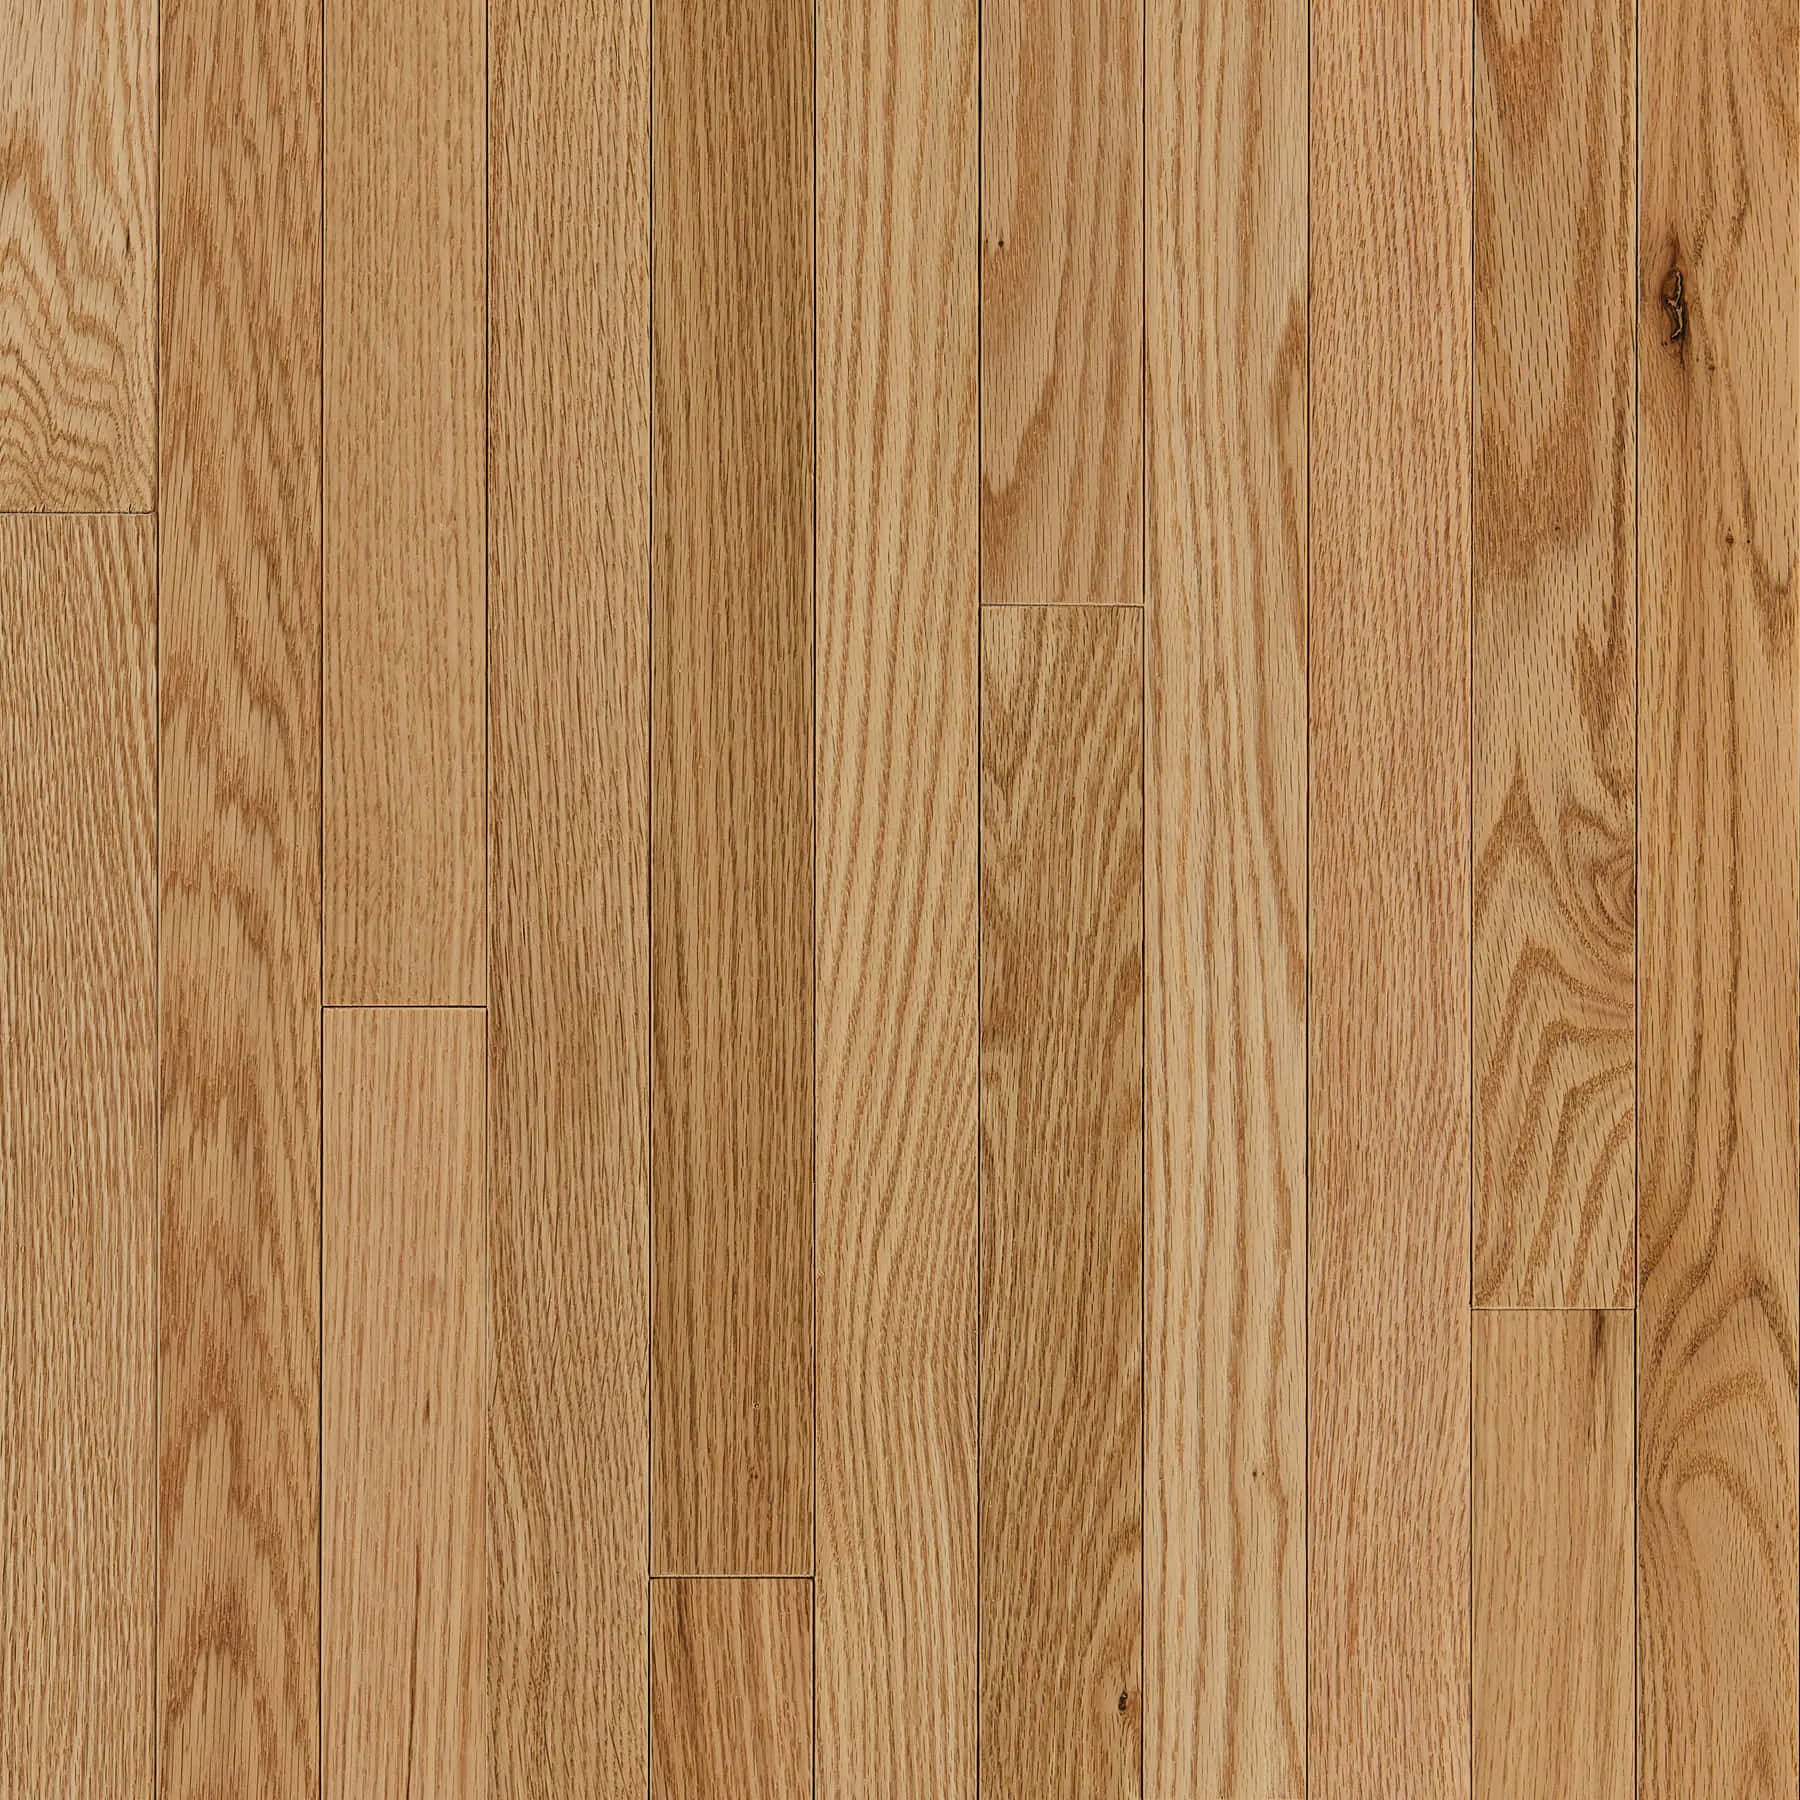 Transform your interior spaces with high quality wood flooring